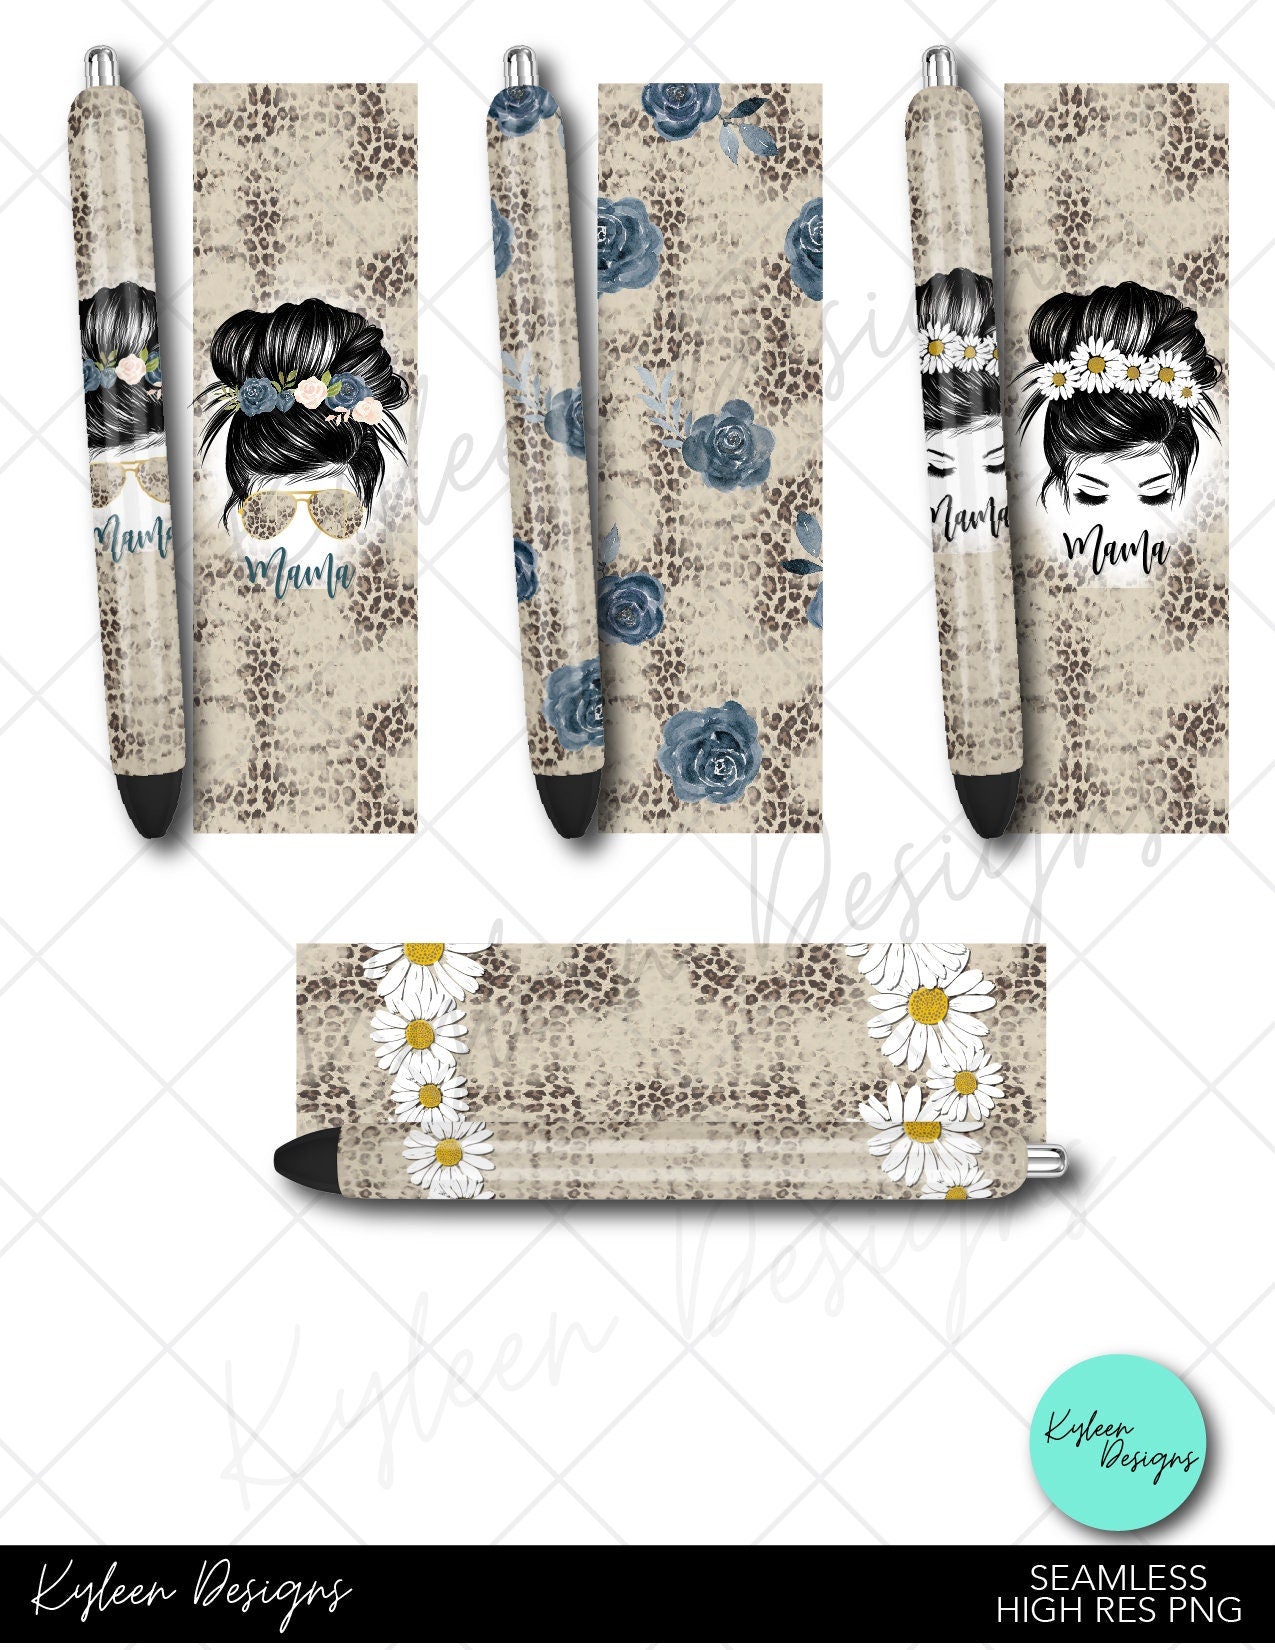 SEAMLESS Daisy Rose leopard mom life pen wraps for waterslide high RES PNG